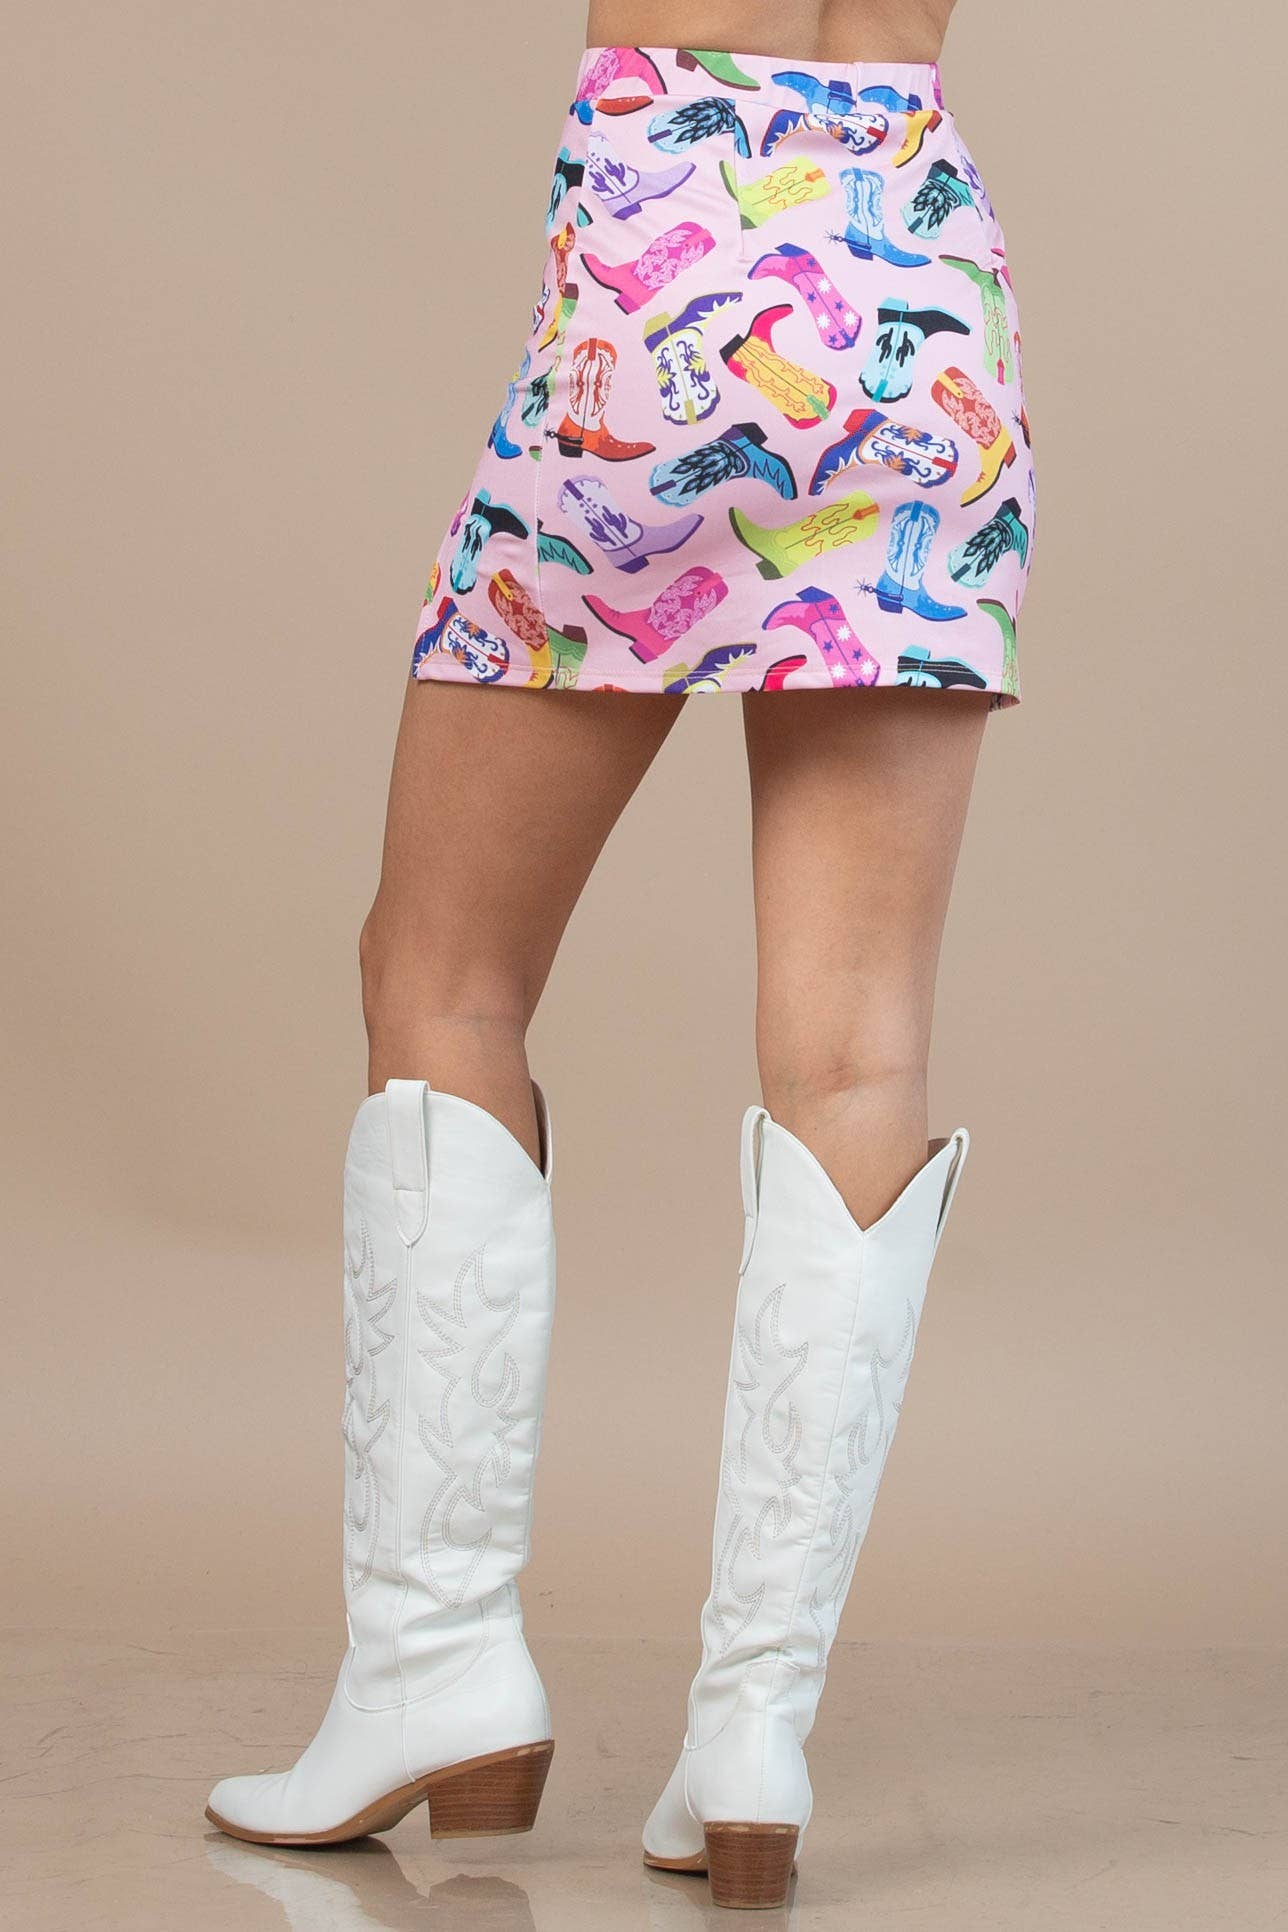 Miss Dolly Cowgirl Boot Mini Skirt!